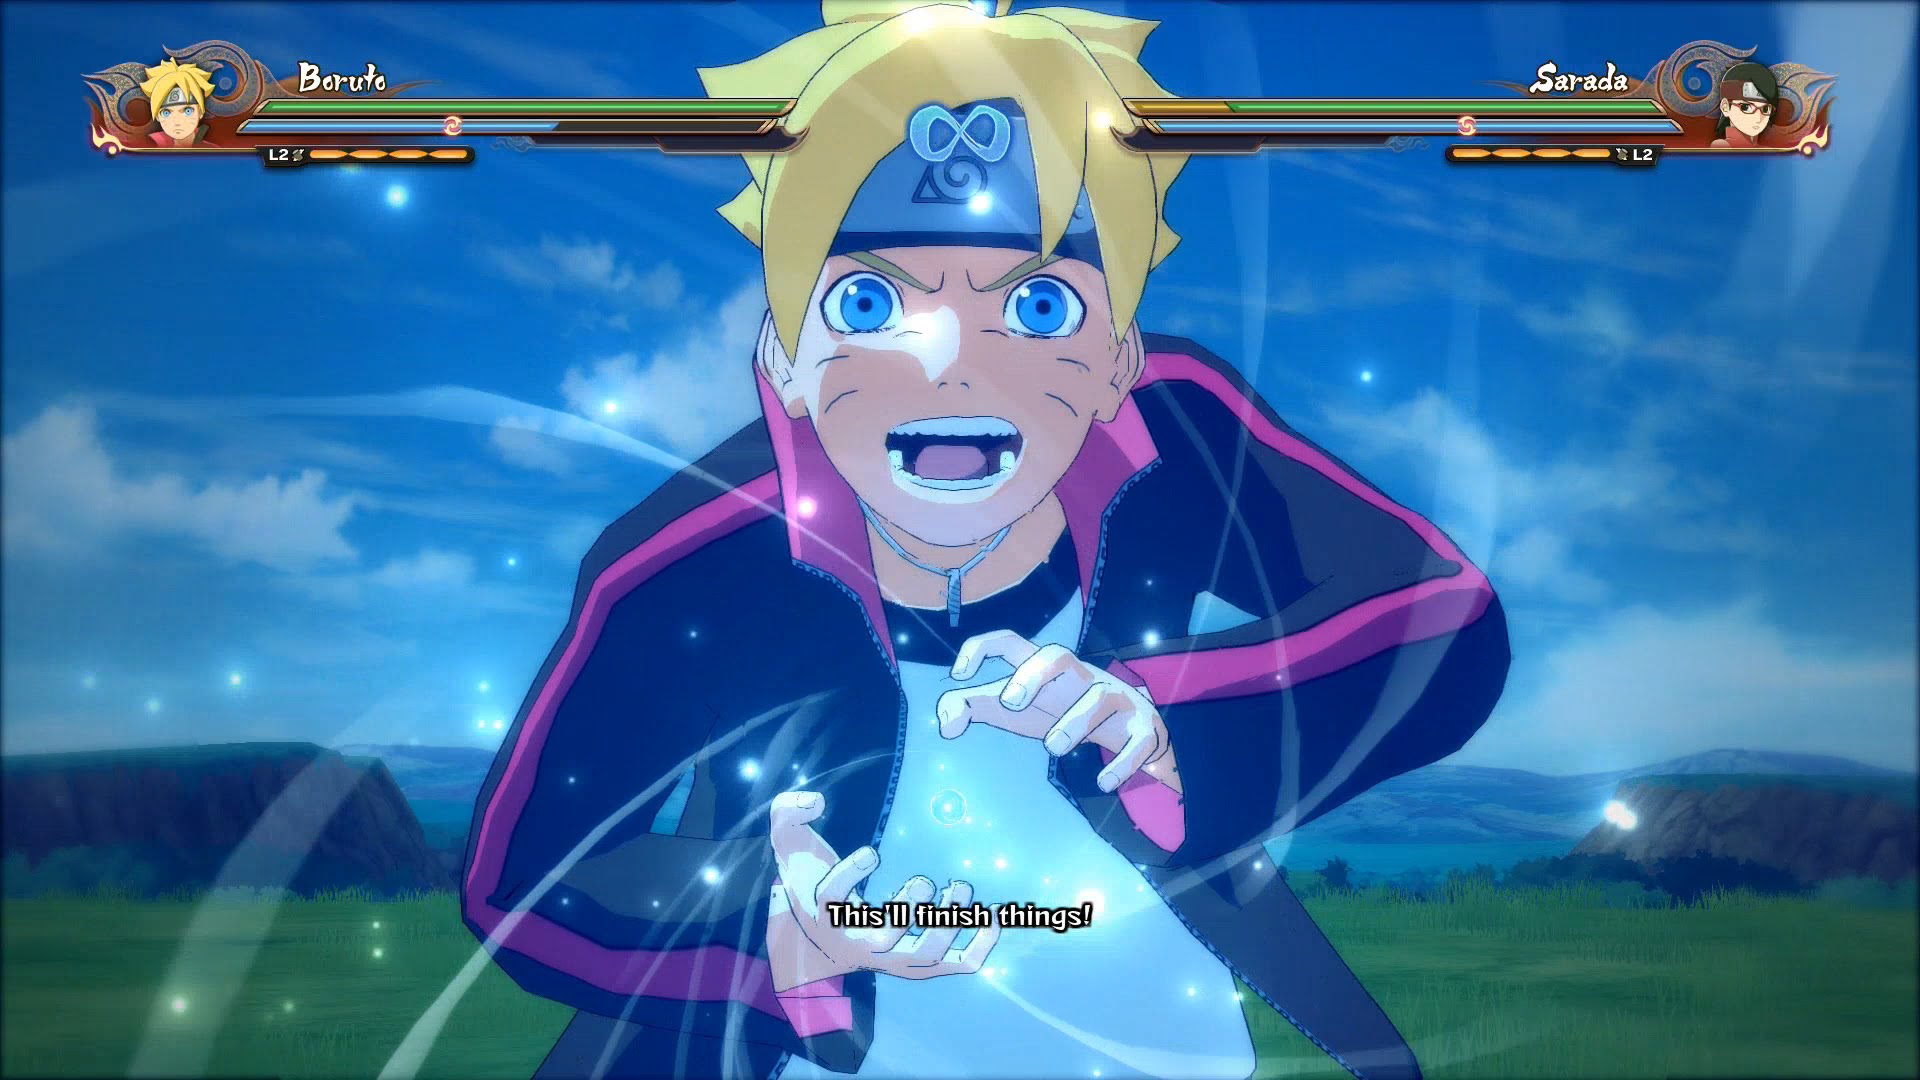 Naruto Shippuden: Ultimate Ninja Storm 4 Hints and Tips for a